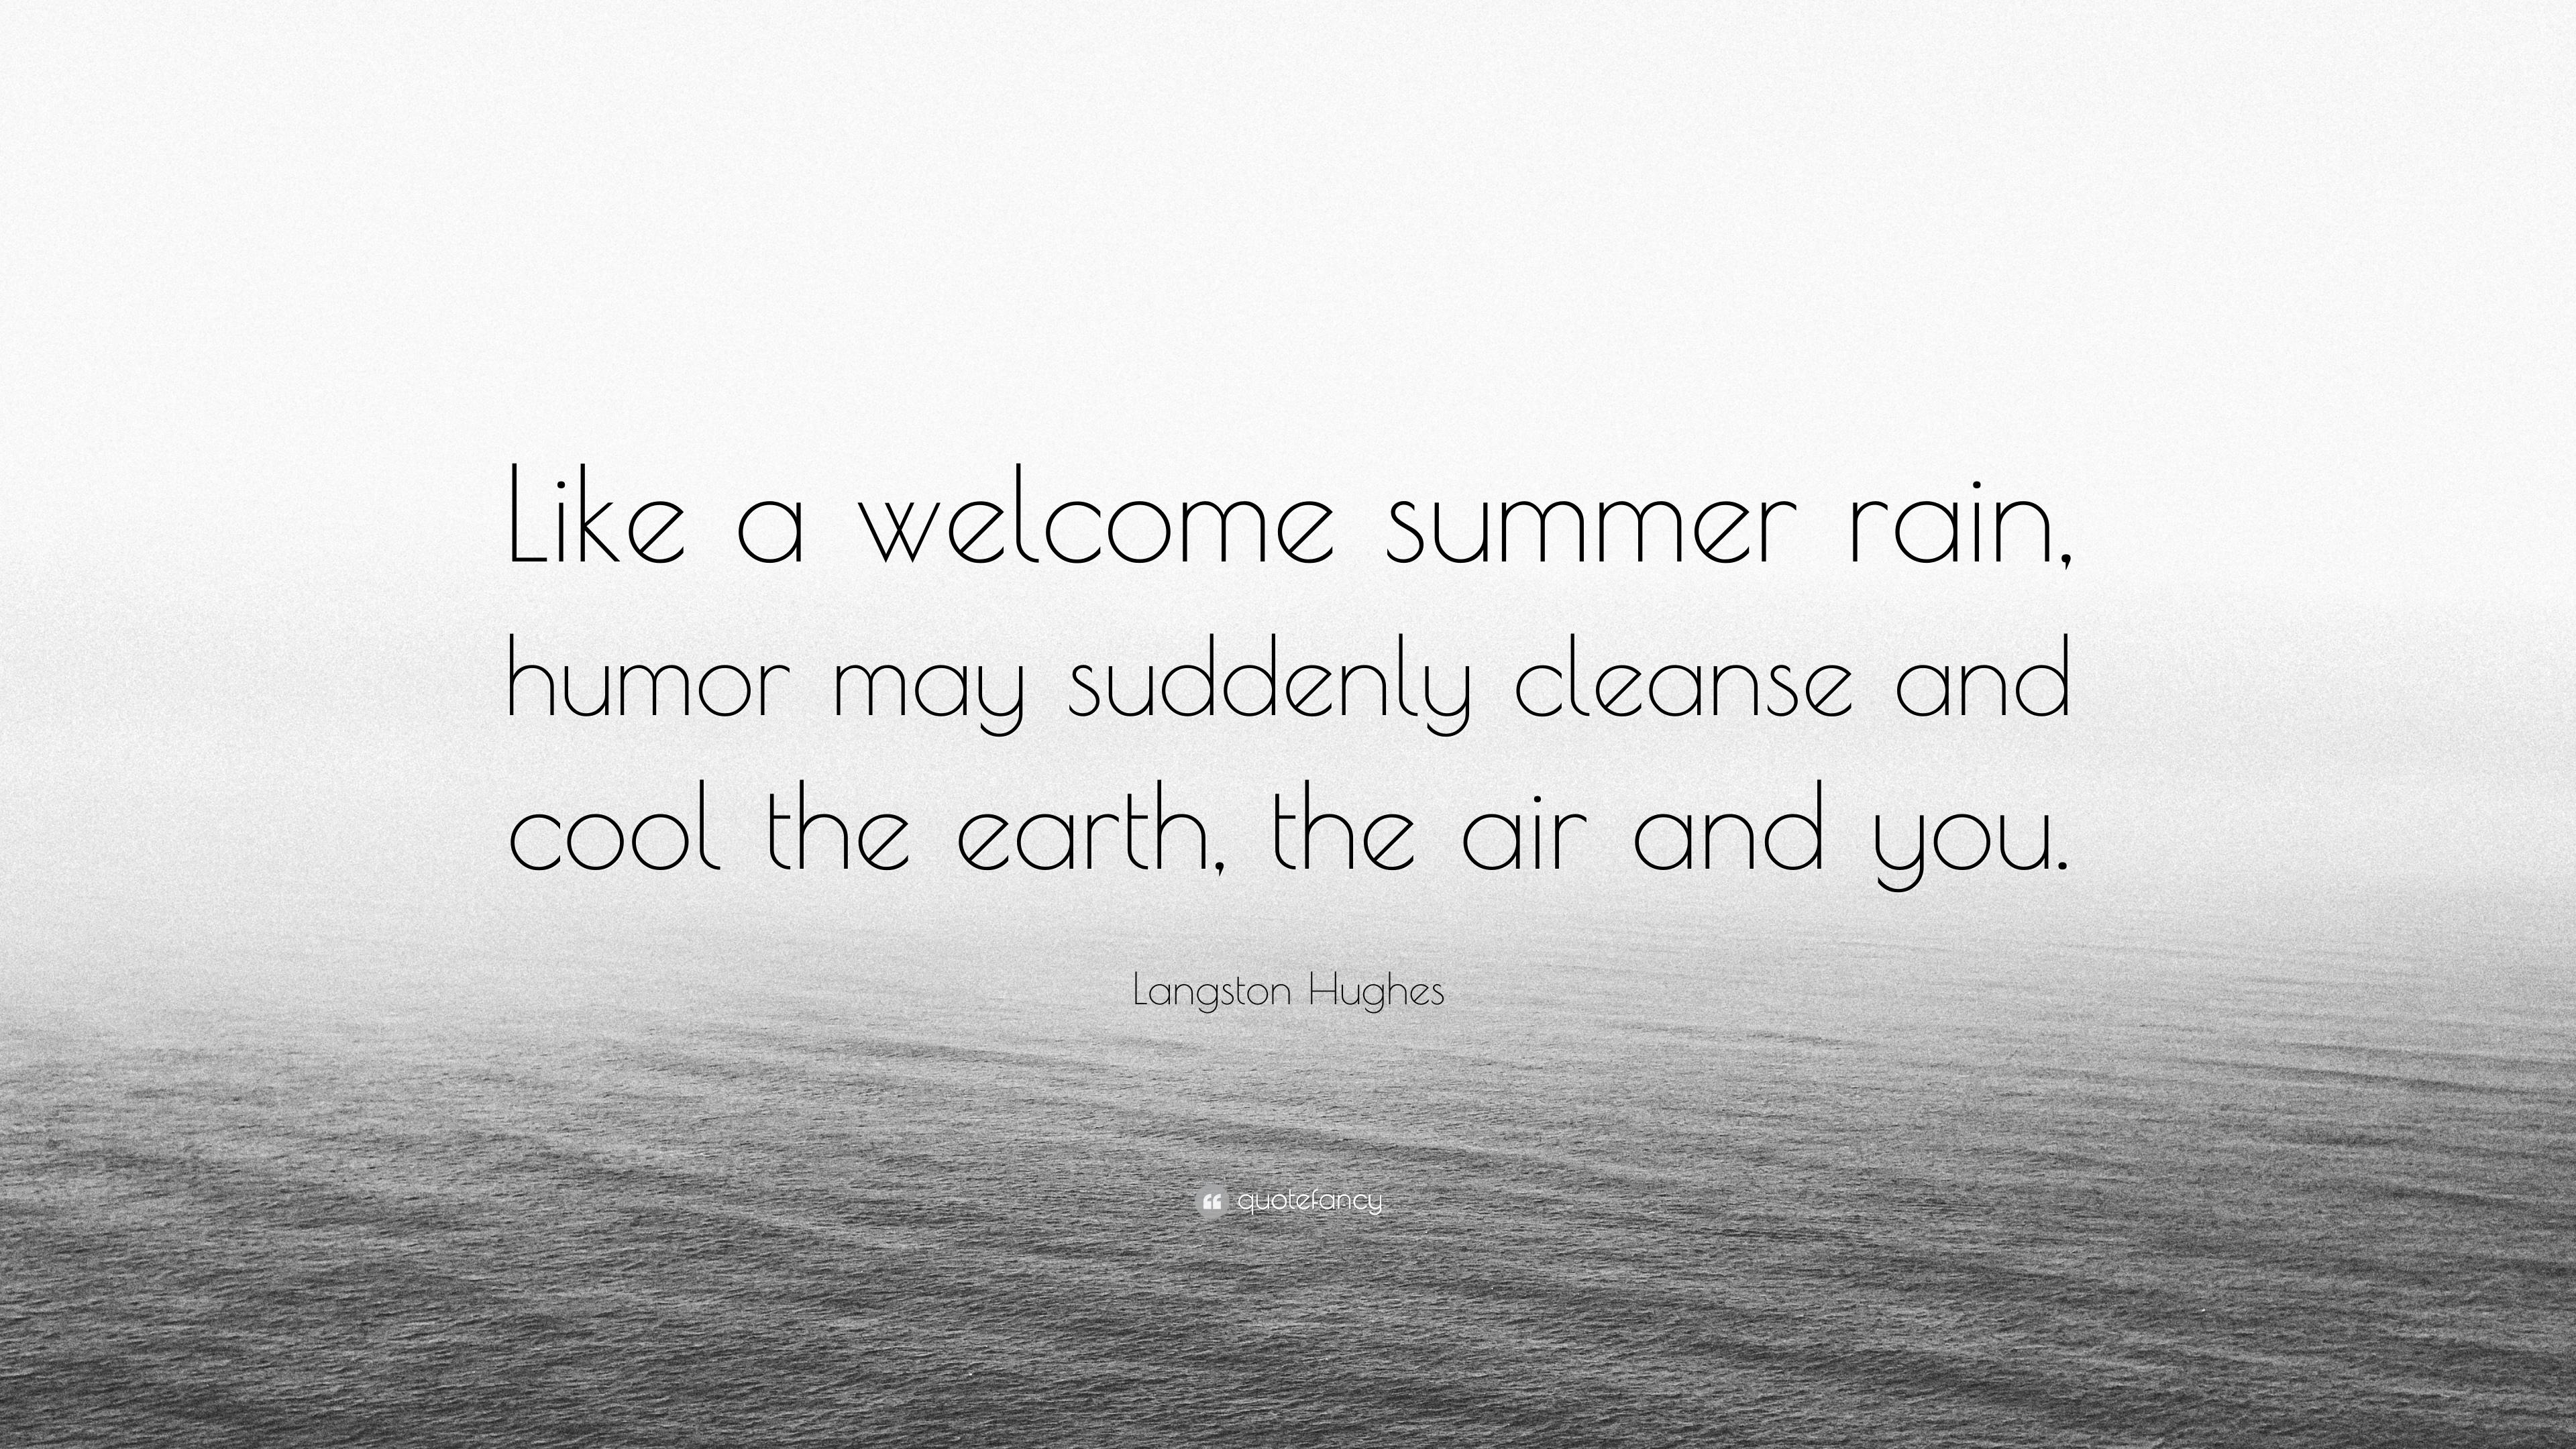 Langston Hughes Quote: “Like a welcome summer rain, humor may